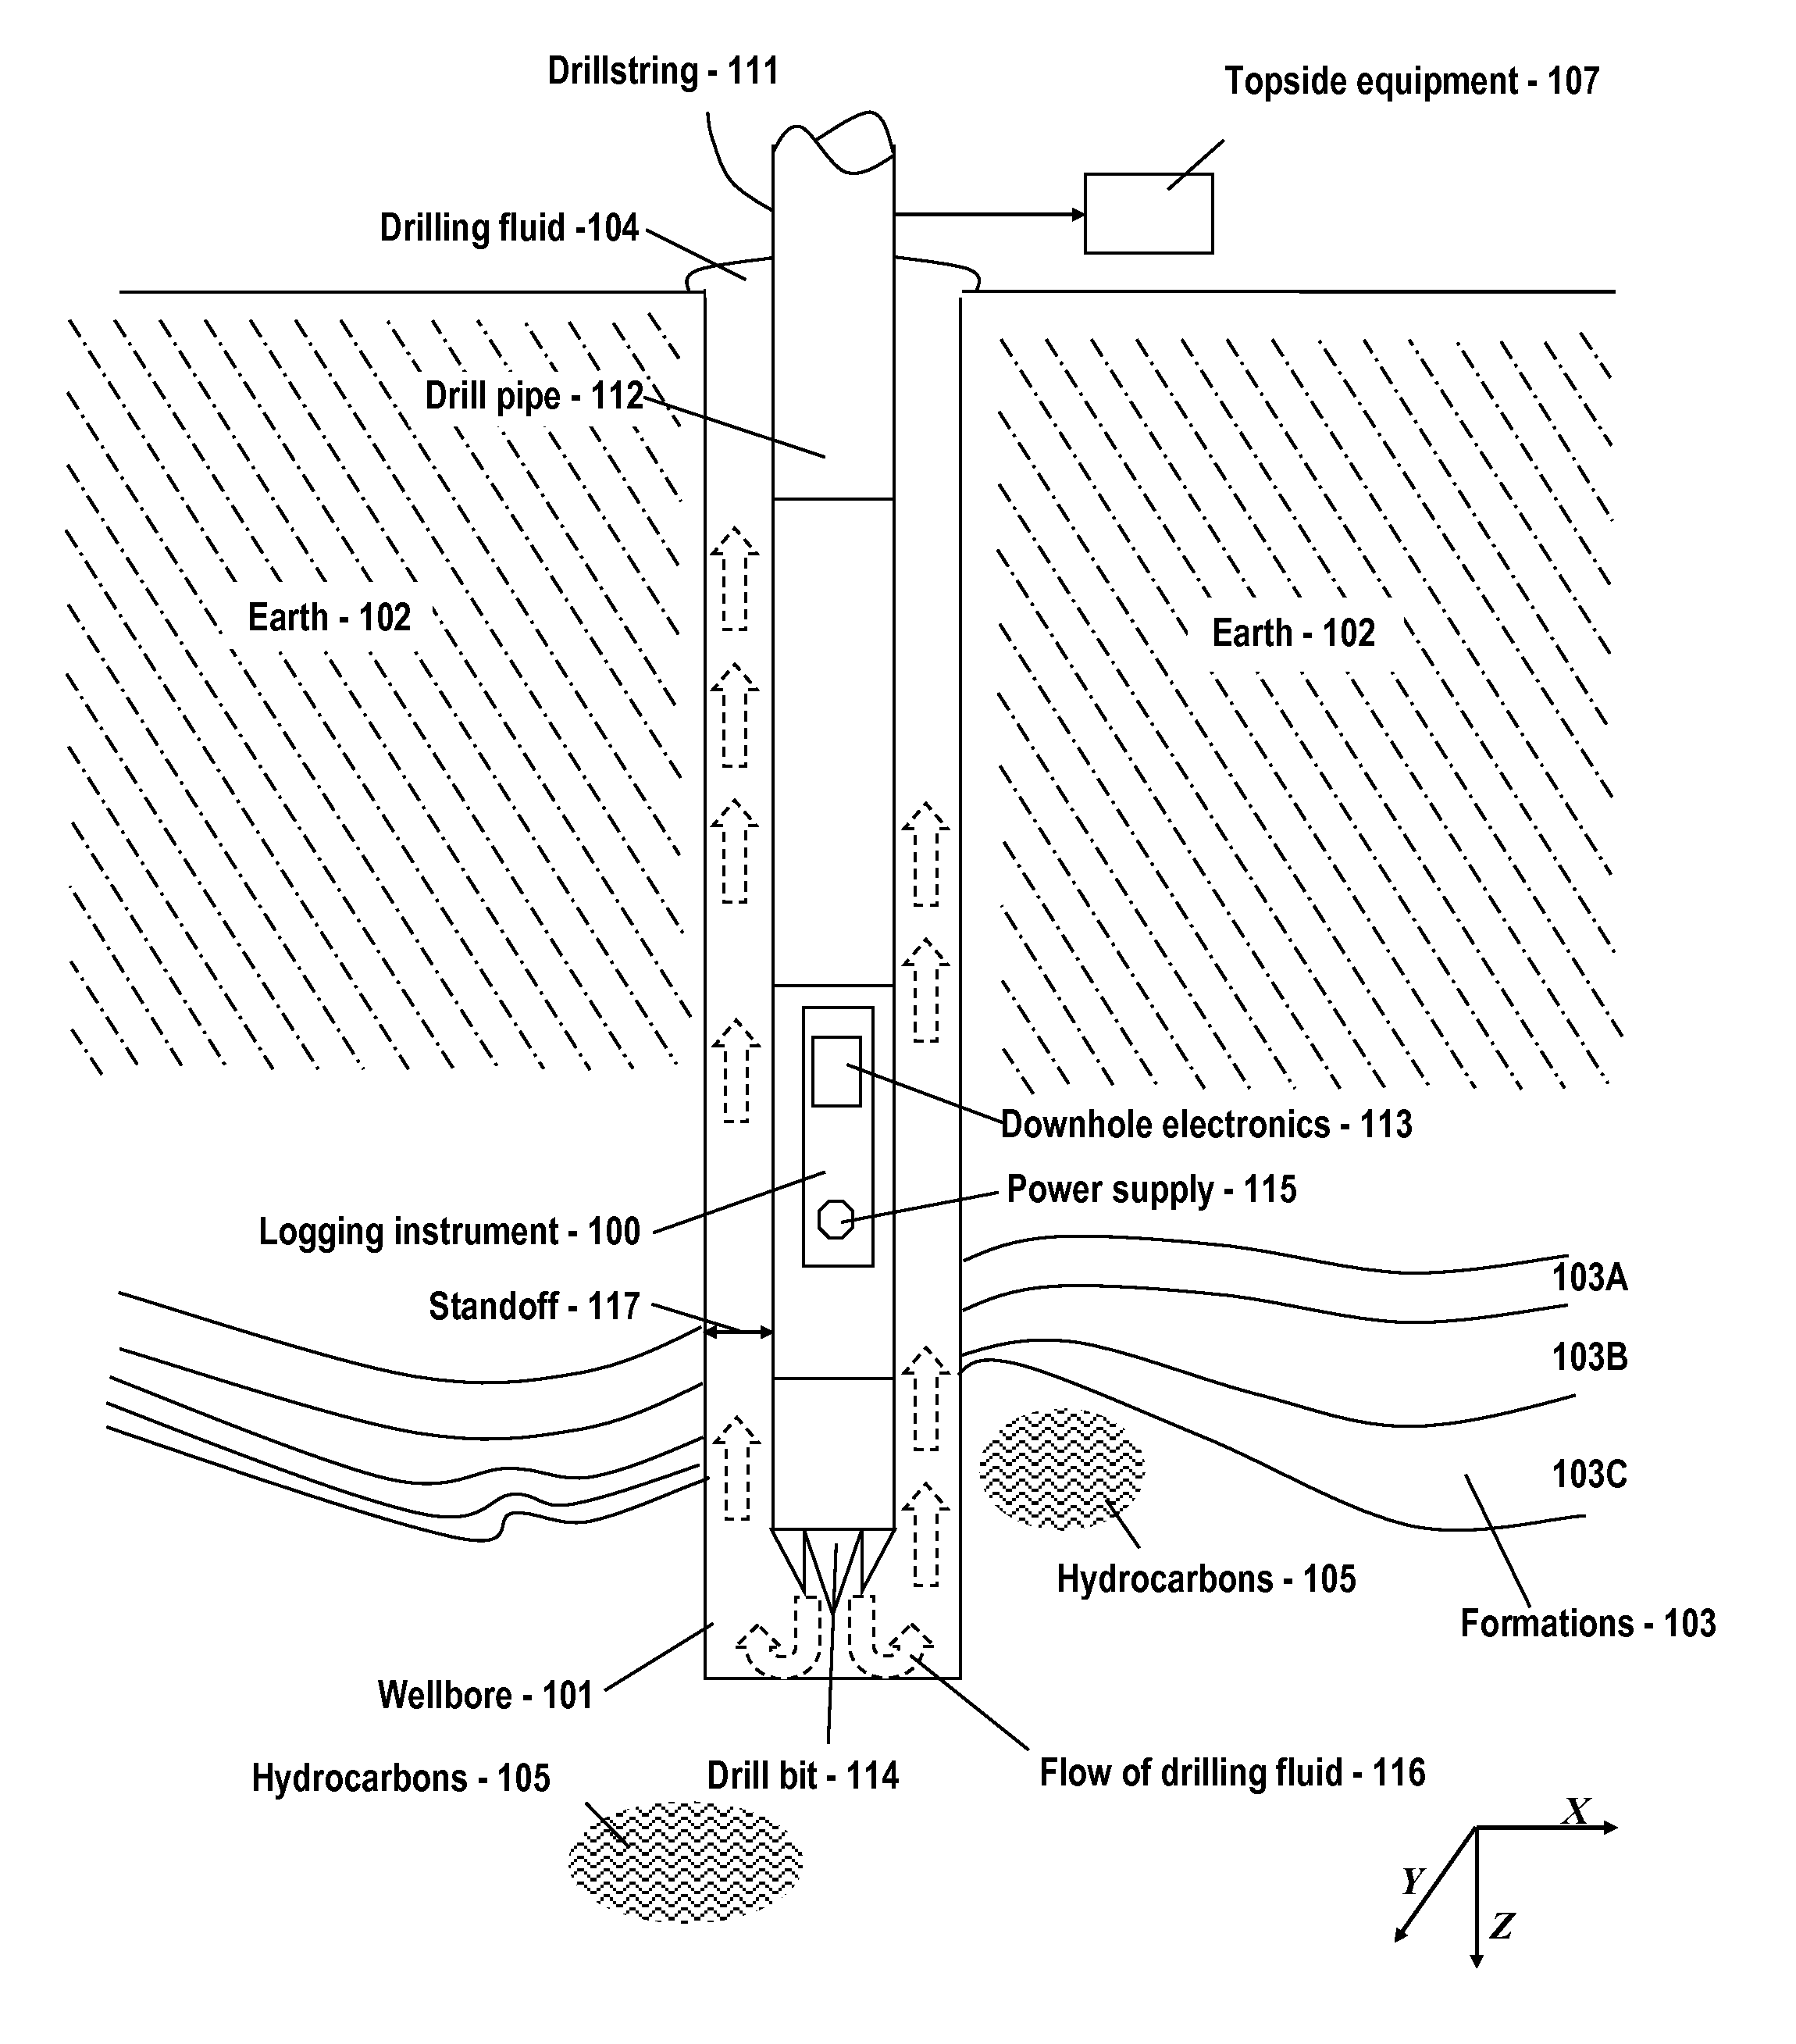 Power system for downhole toolstring